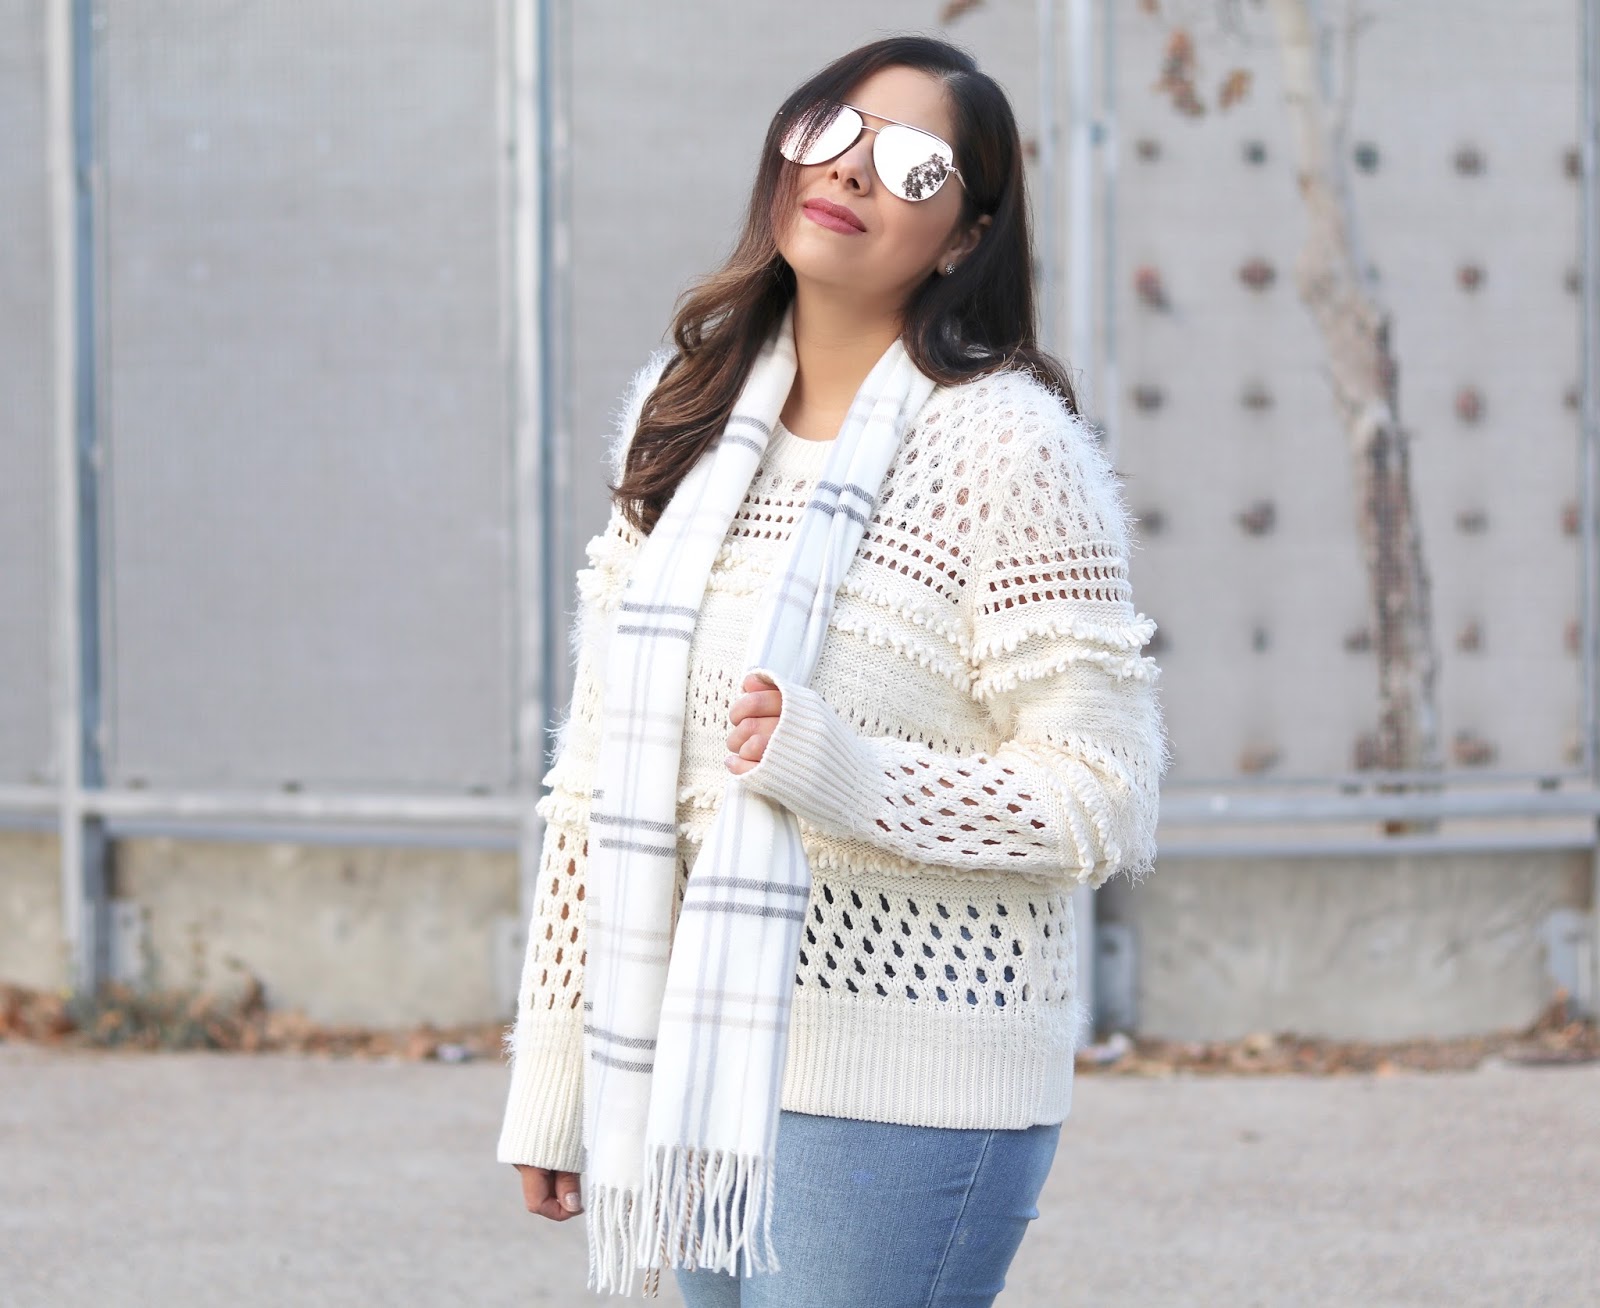 Neutral Colored Winter Outfit - Lil bits of Chic